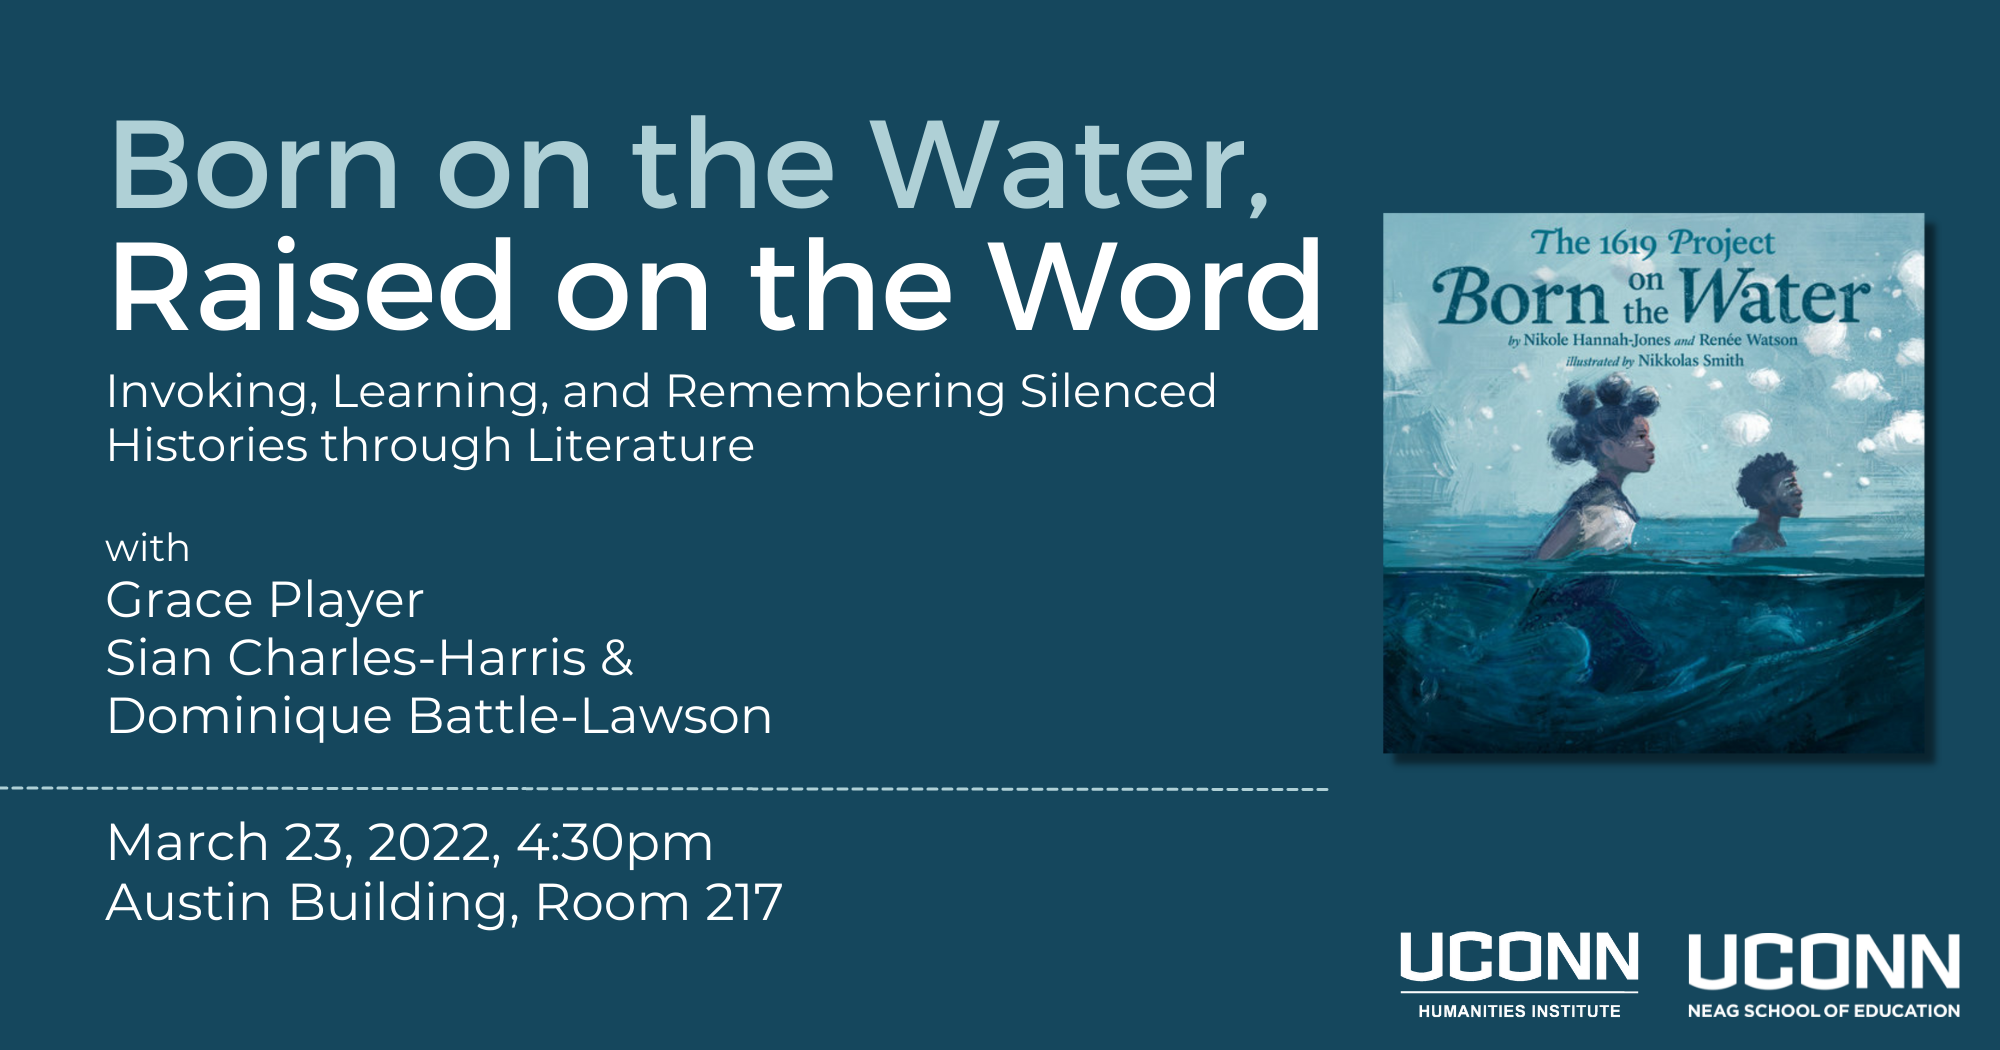 Born on the Water, Raised on the Word: Invoking, Learning, and Remembering Silenced Histories Through Literature, with Grace Player, Sian Charles-Harris, and Dominique Battle-Lawson. March 23, 2022, 4:30pm, Austin Building Room 217